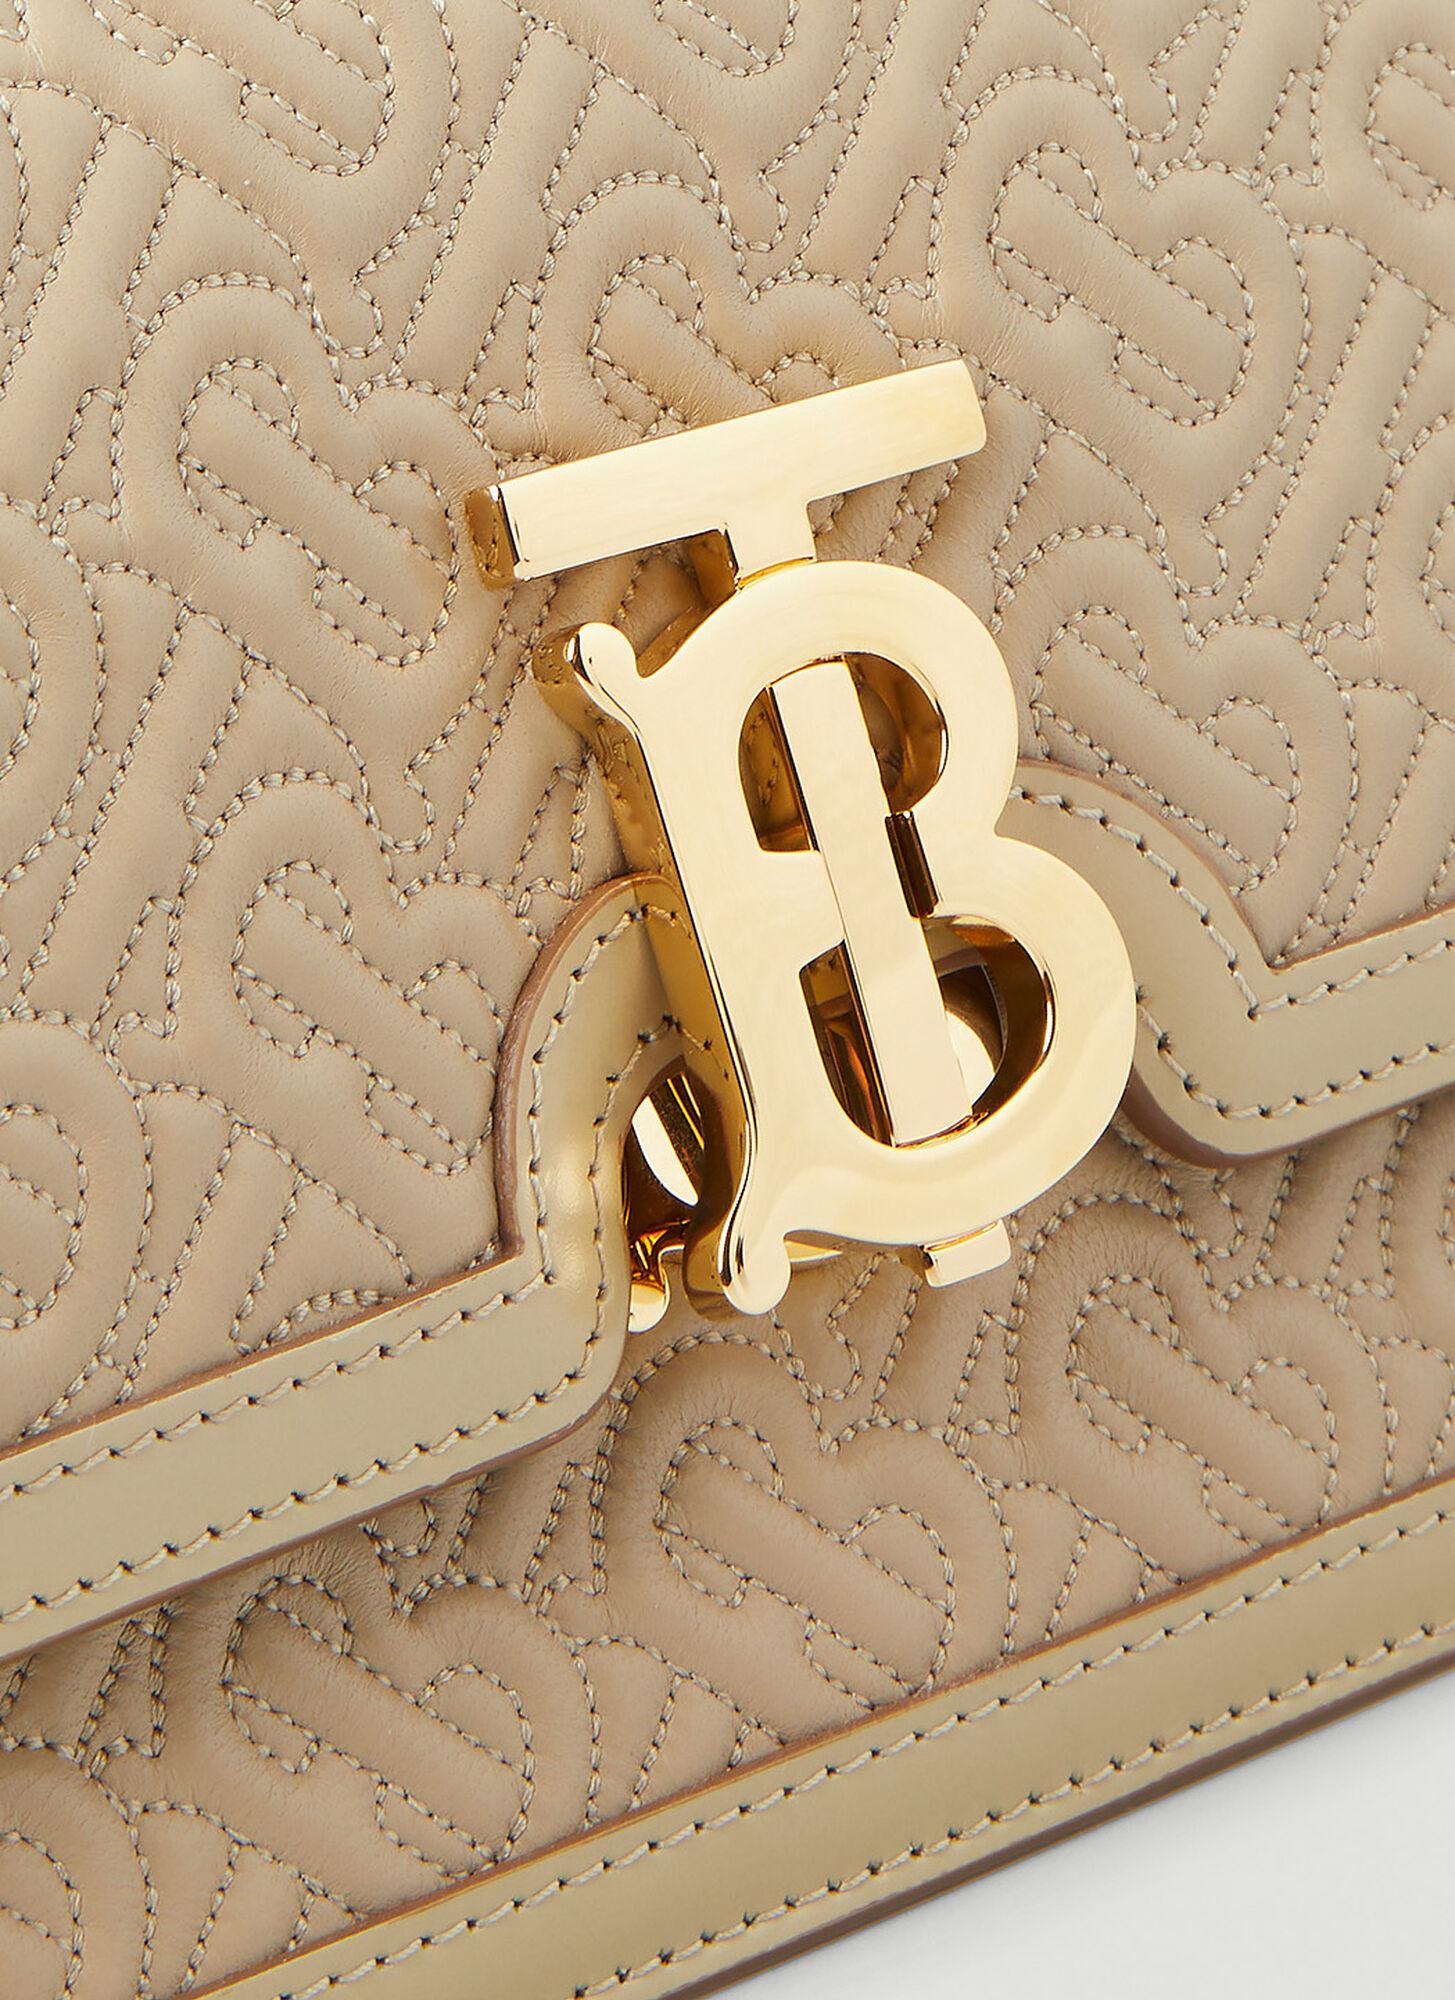 BURBERRY SMALL QUILTED TB MONOGRAM BAG 8019336 BARGAIN